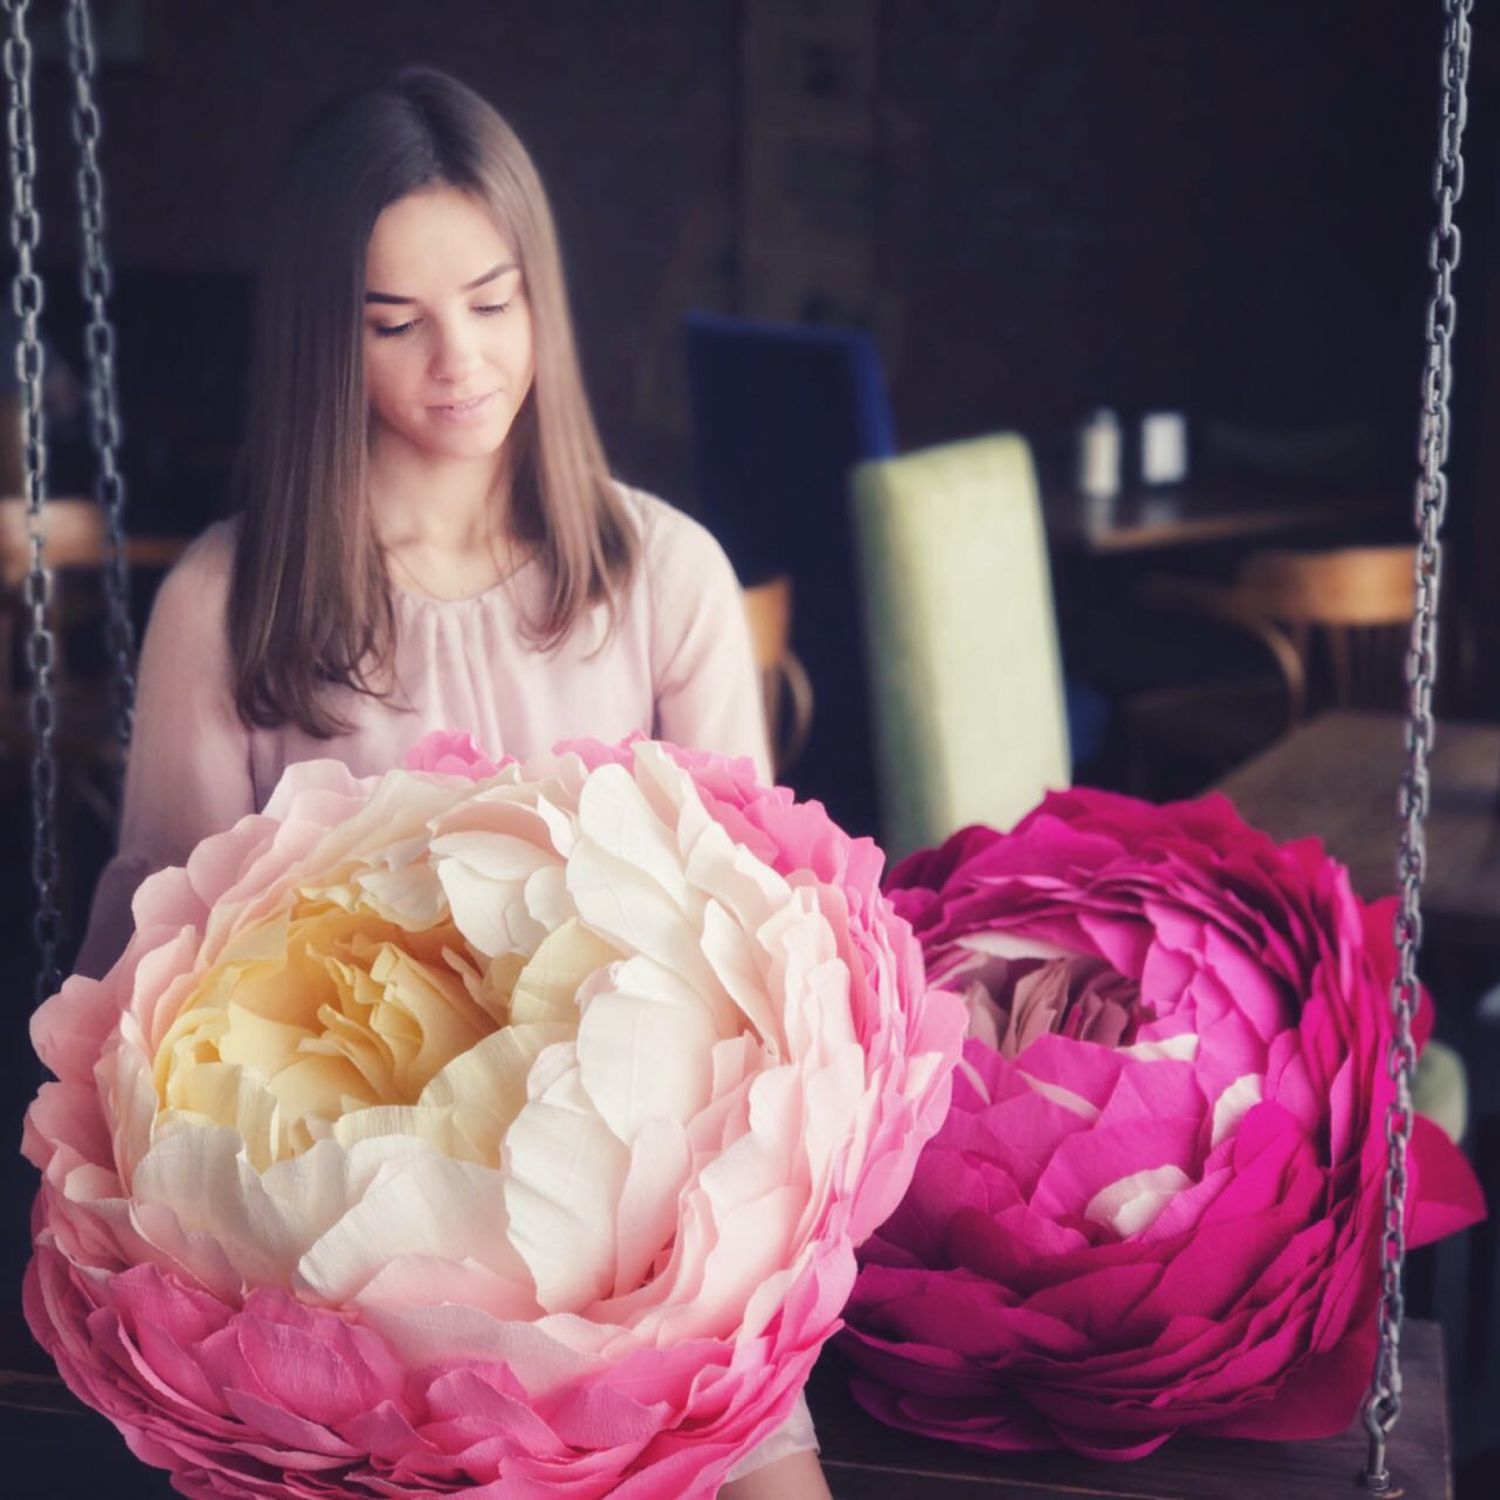 Large Paper Flowers 